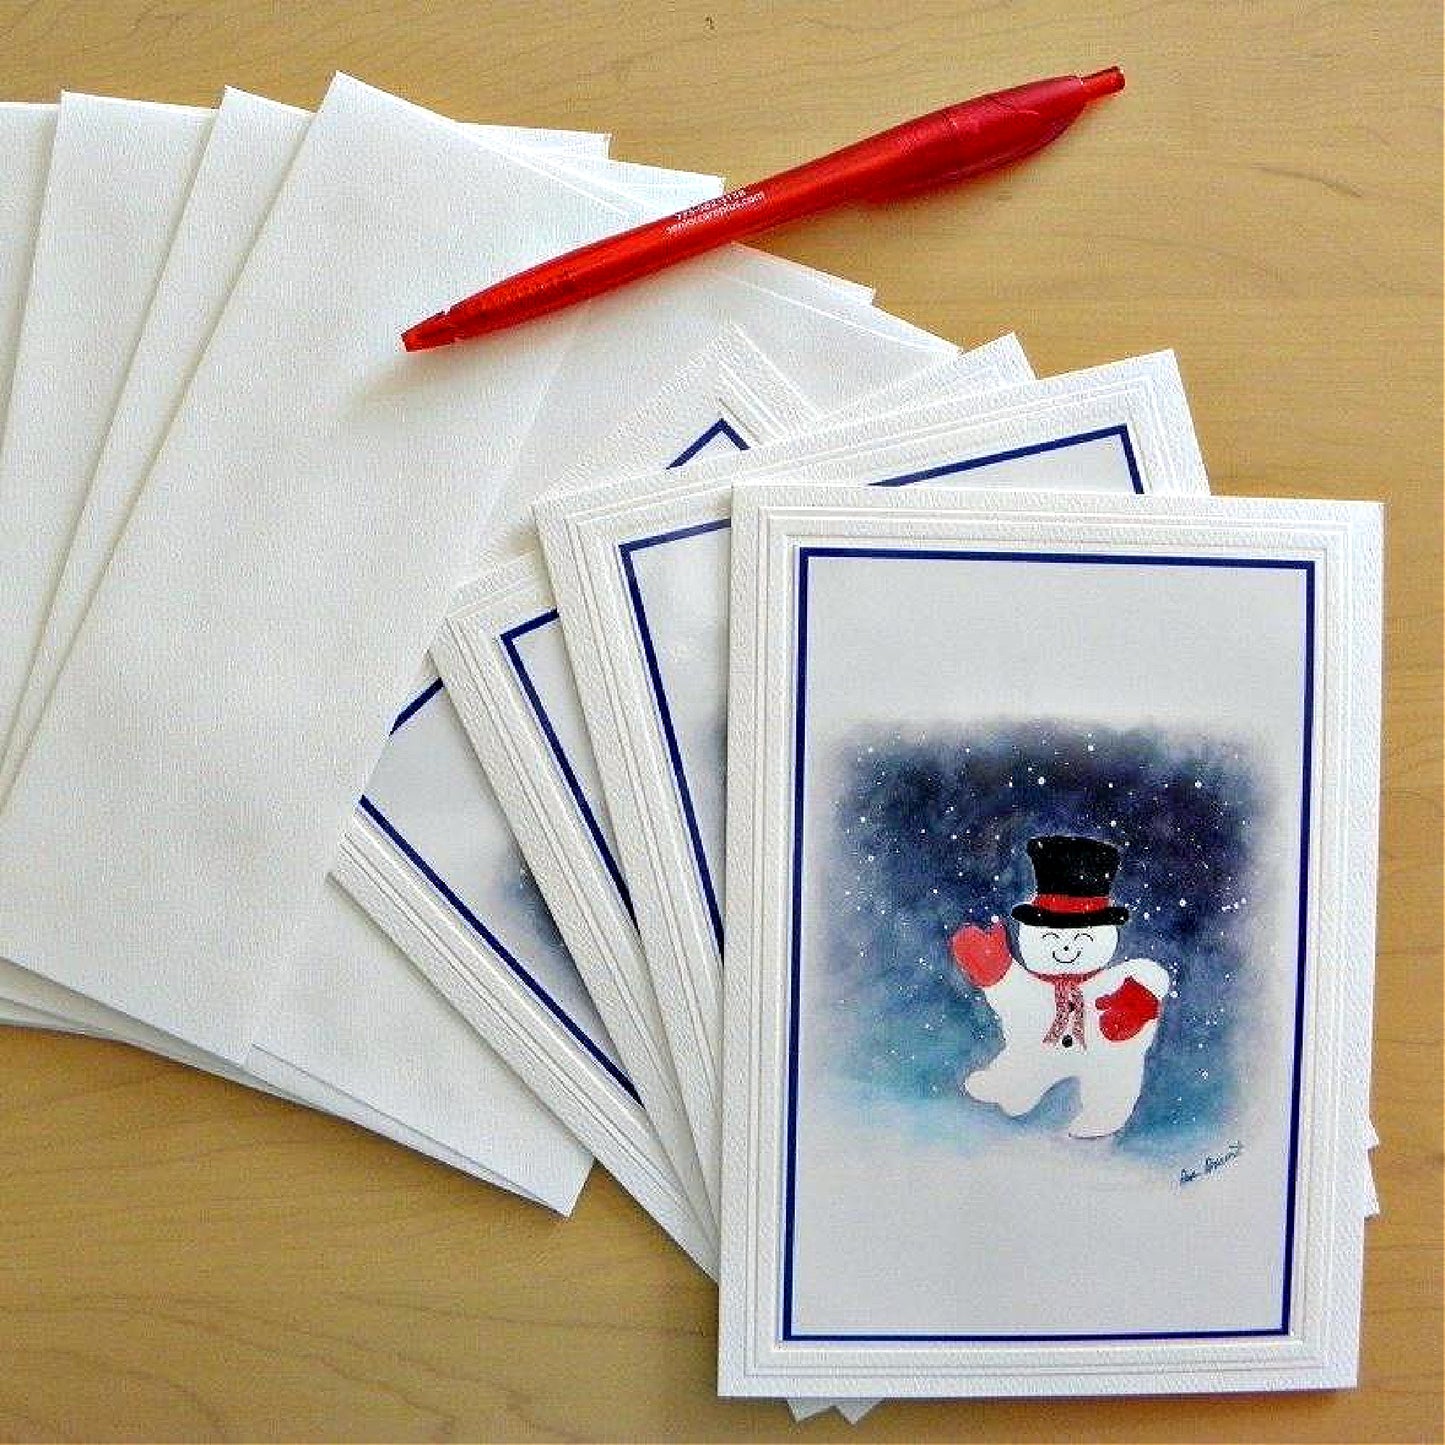 Our 4-piece set of Snowman Greeting Cards with envelopes  (red pen not included)